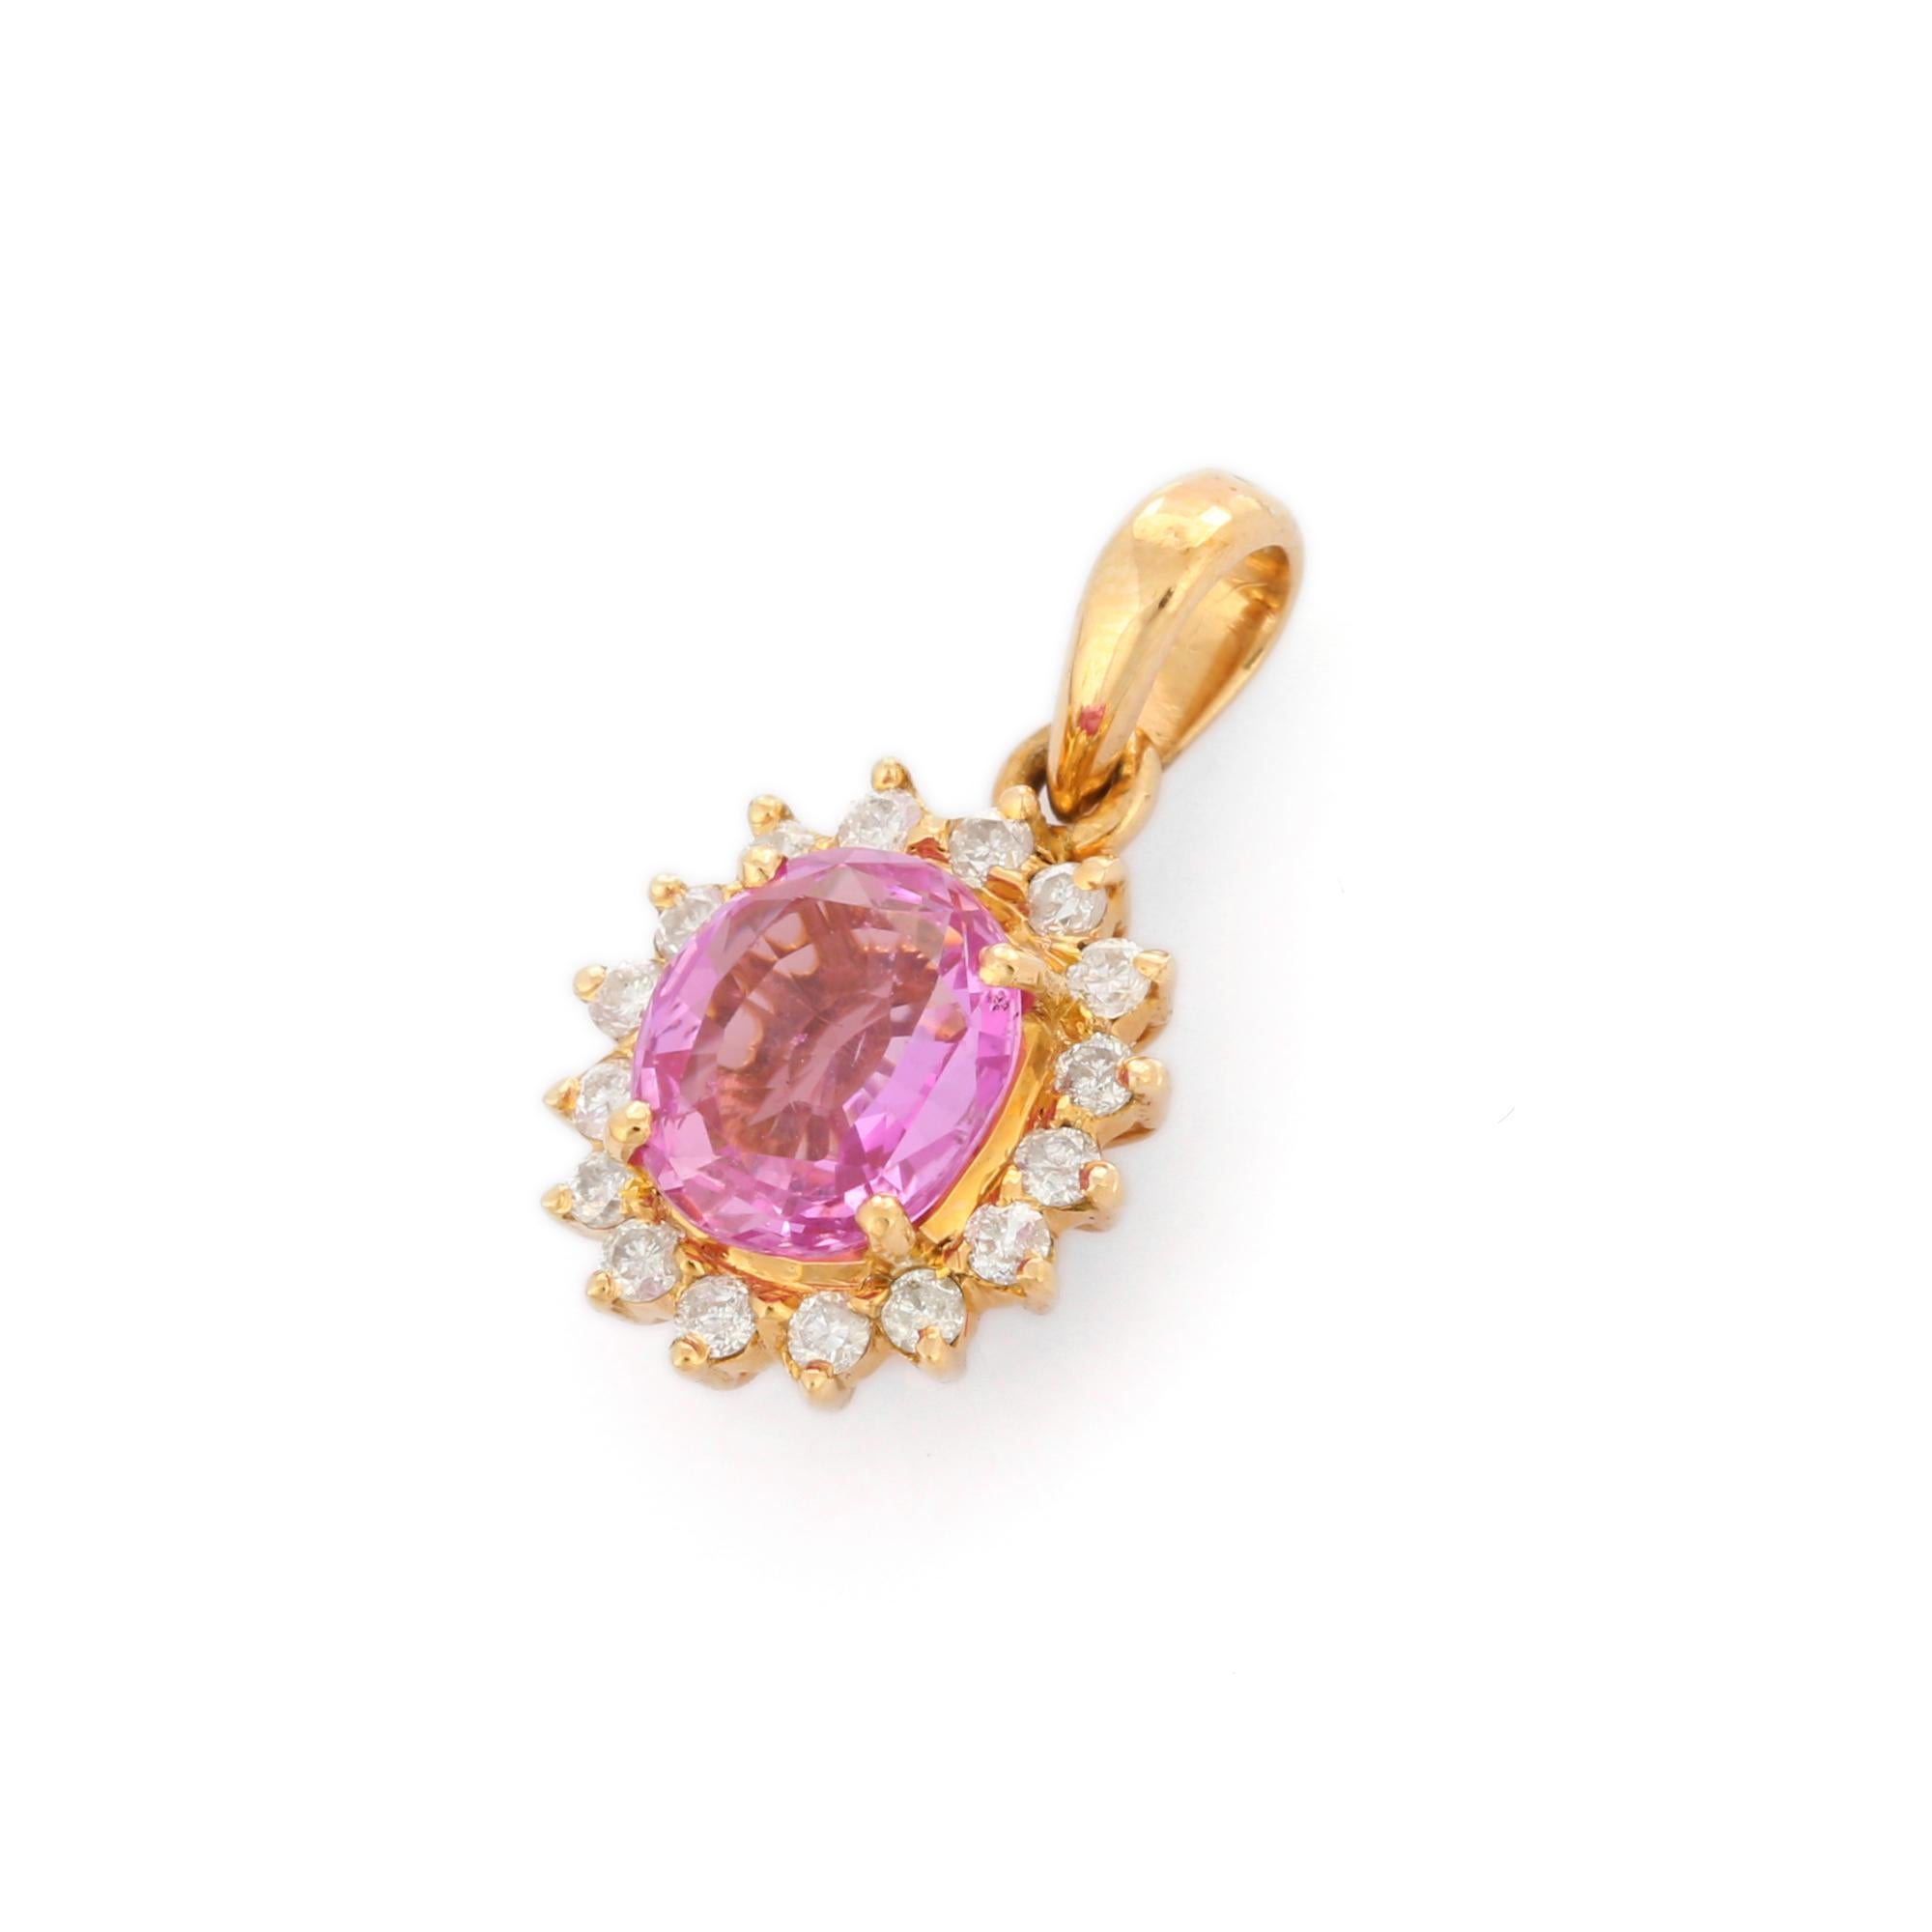 Pink sapphire and halo diamond pendant in 18K Gold. It has a oval cut sapphire with diamonds that completes your look with a decent touch. Pendants are used to wear or gifted to represent love and promises. It's an attractive jewelry piece that goes